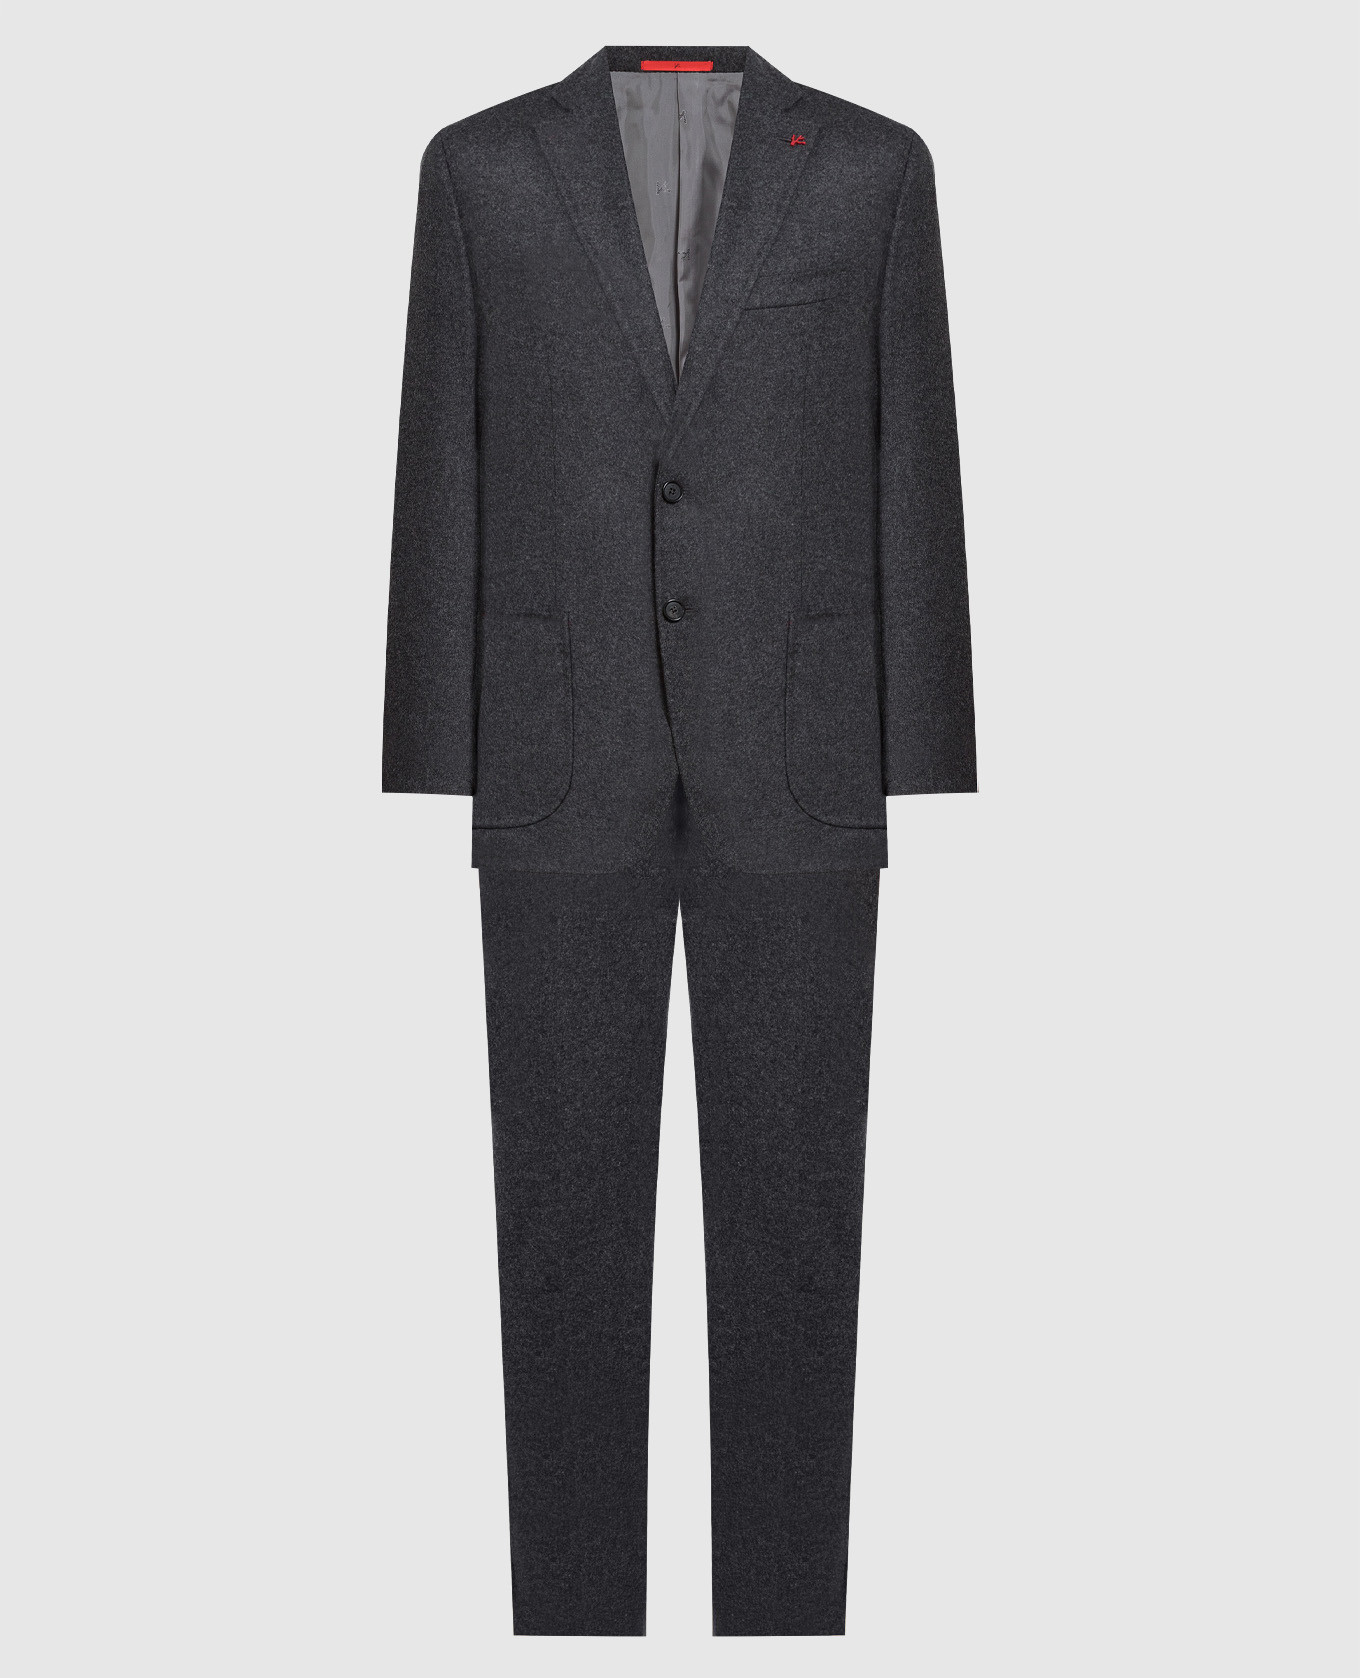 Gray wool and cashmere suit